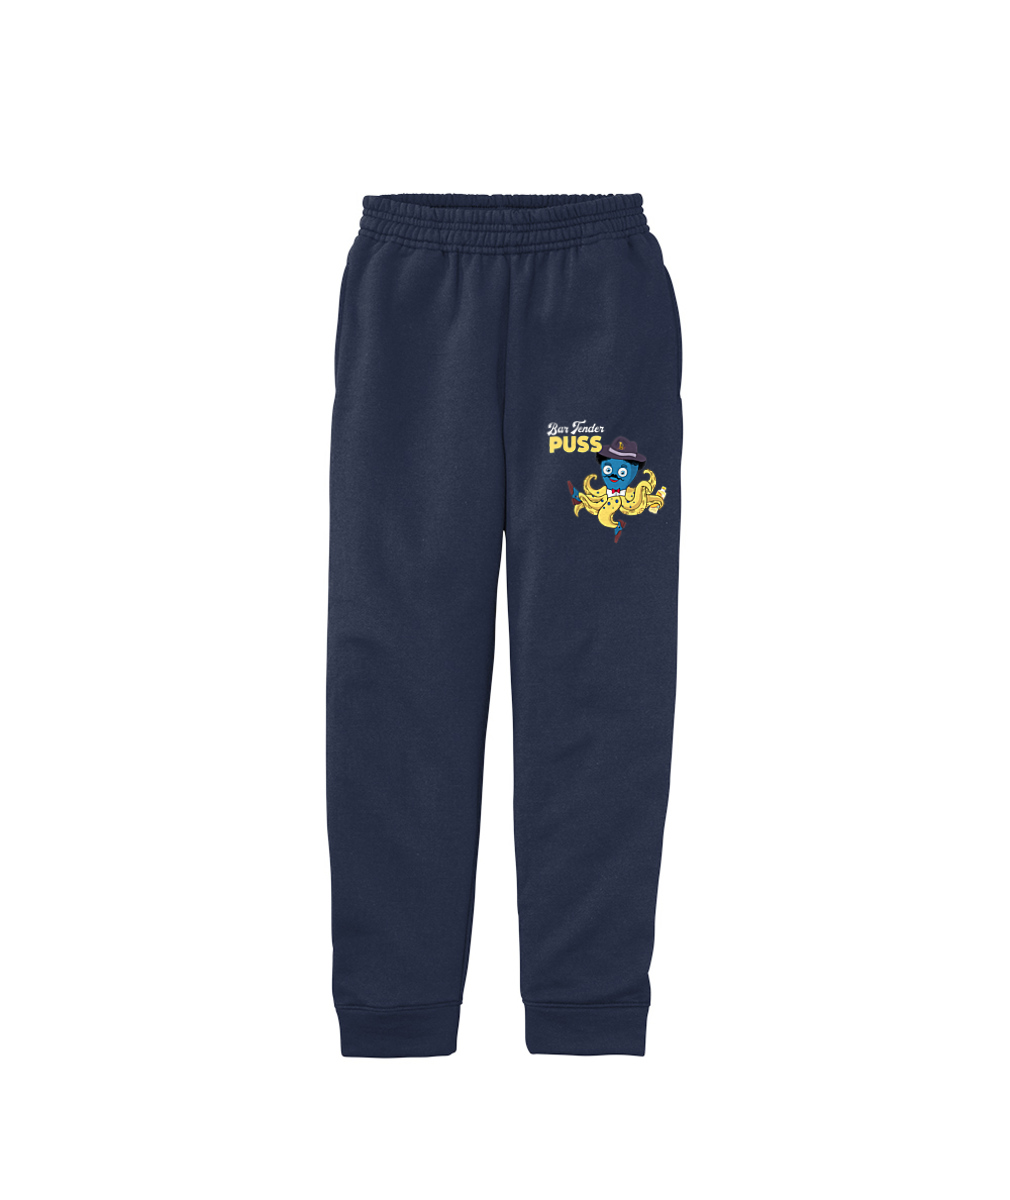 Bartender Puss  Youth Core Fleece Embroidered Jogger or Similar